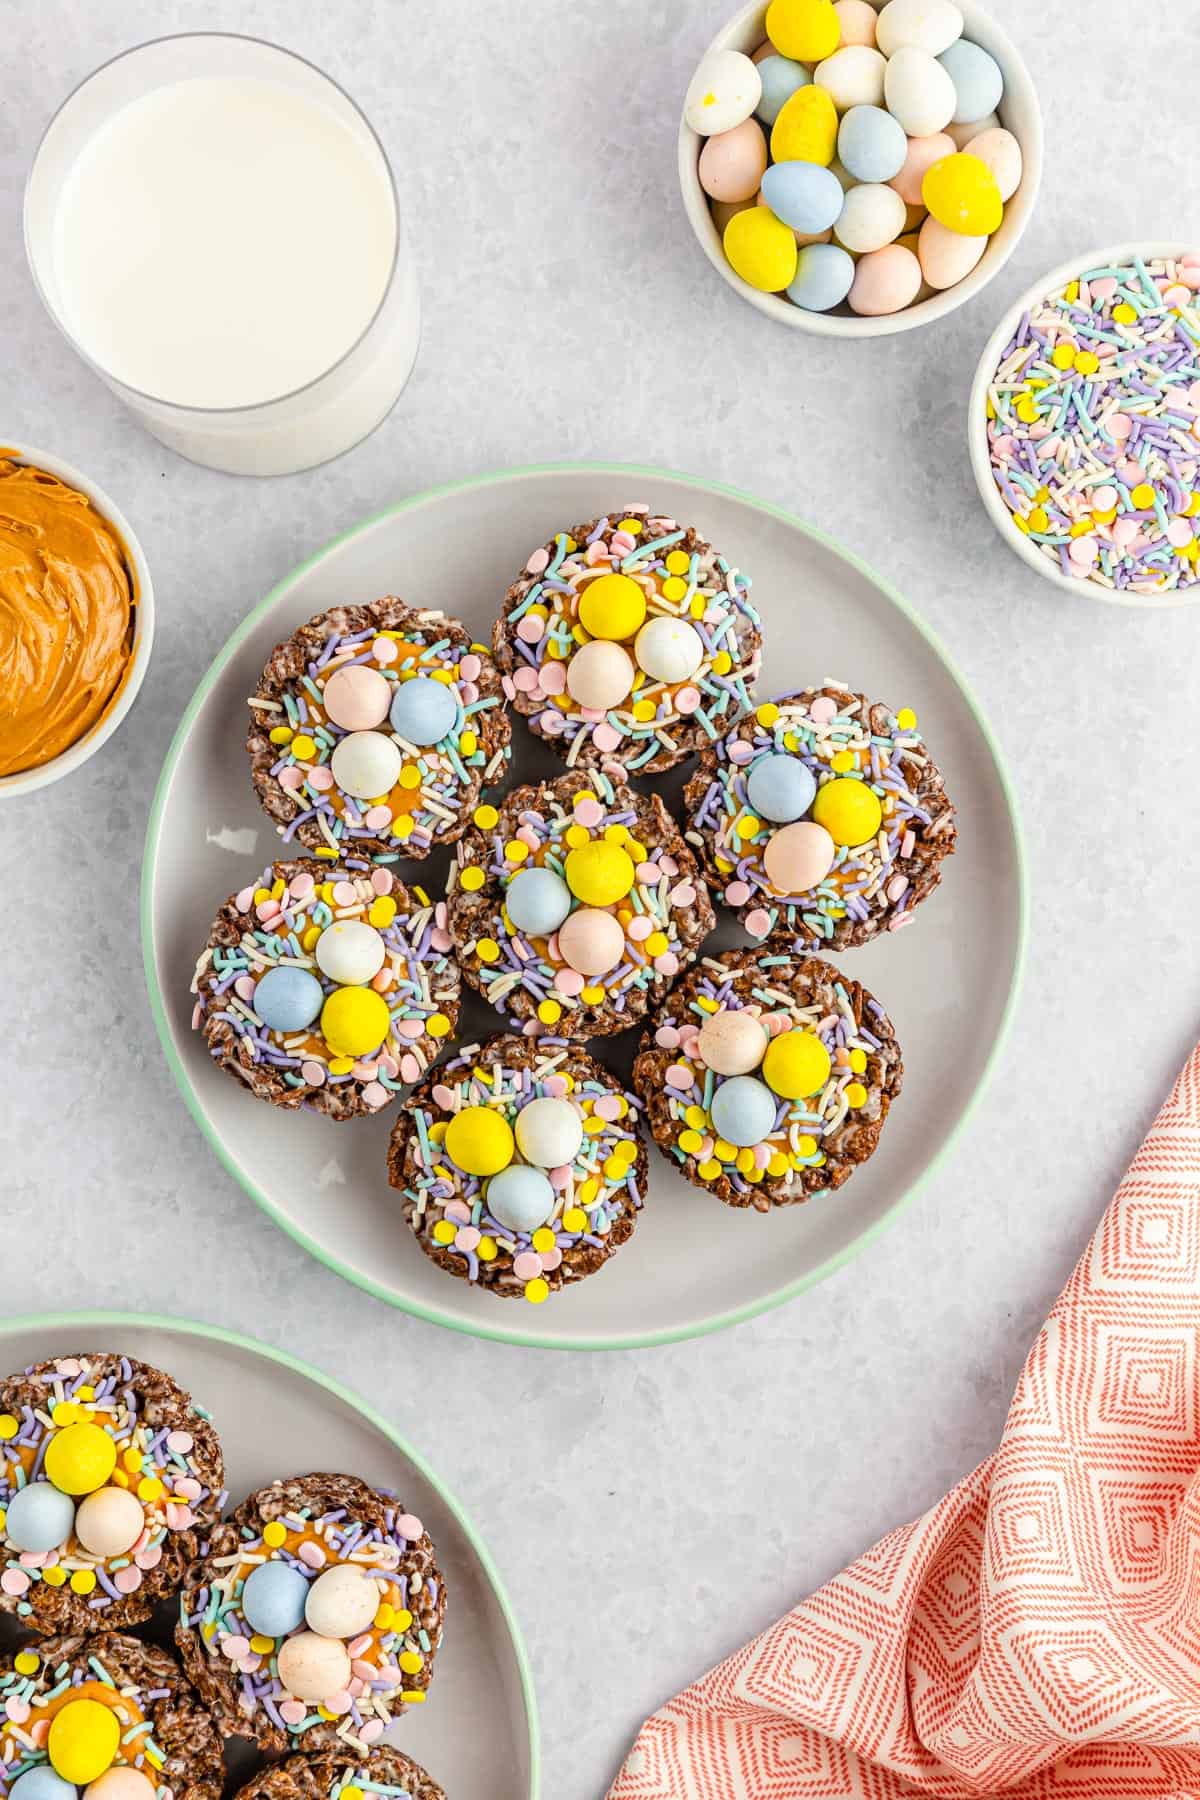 A plate full of peanut butter chocolate Easter nests with sprinkles and Cadbury mini eggs.